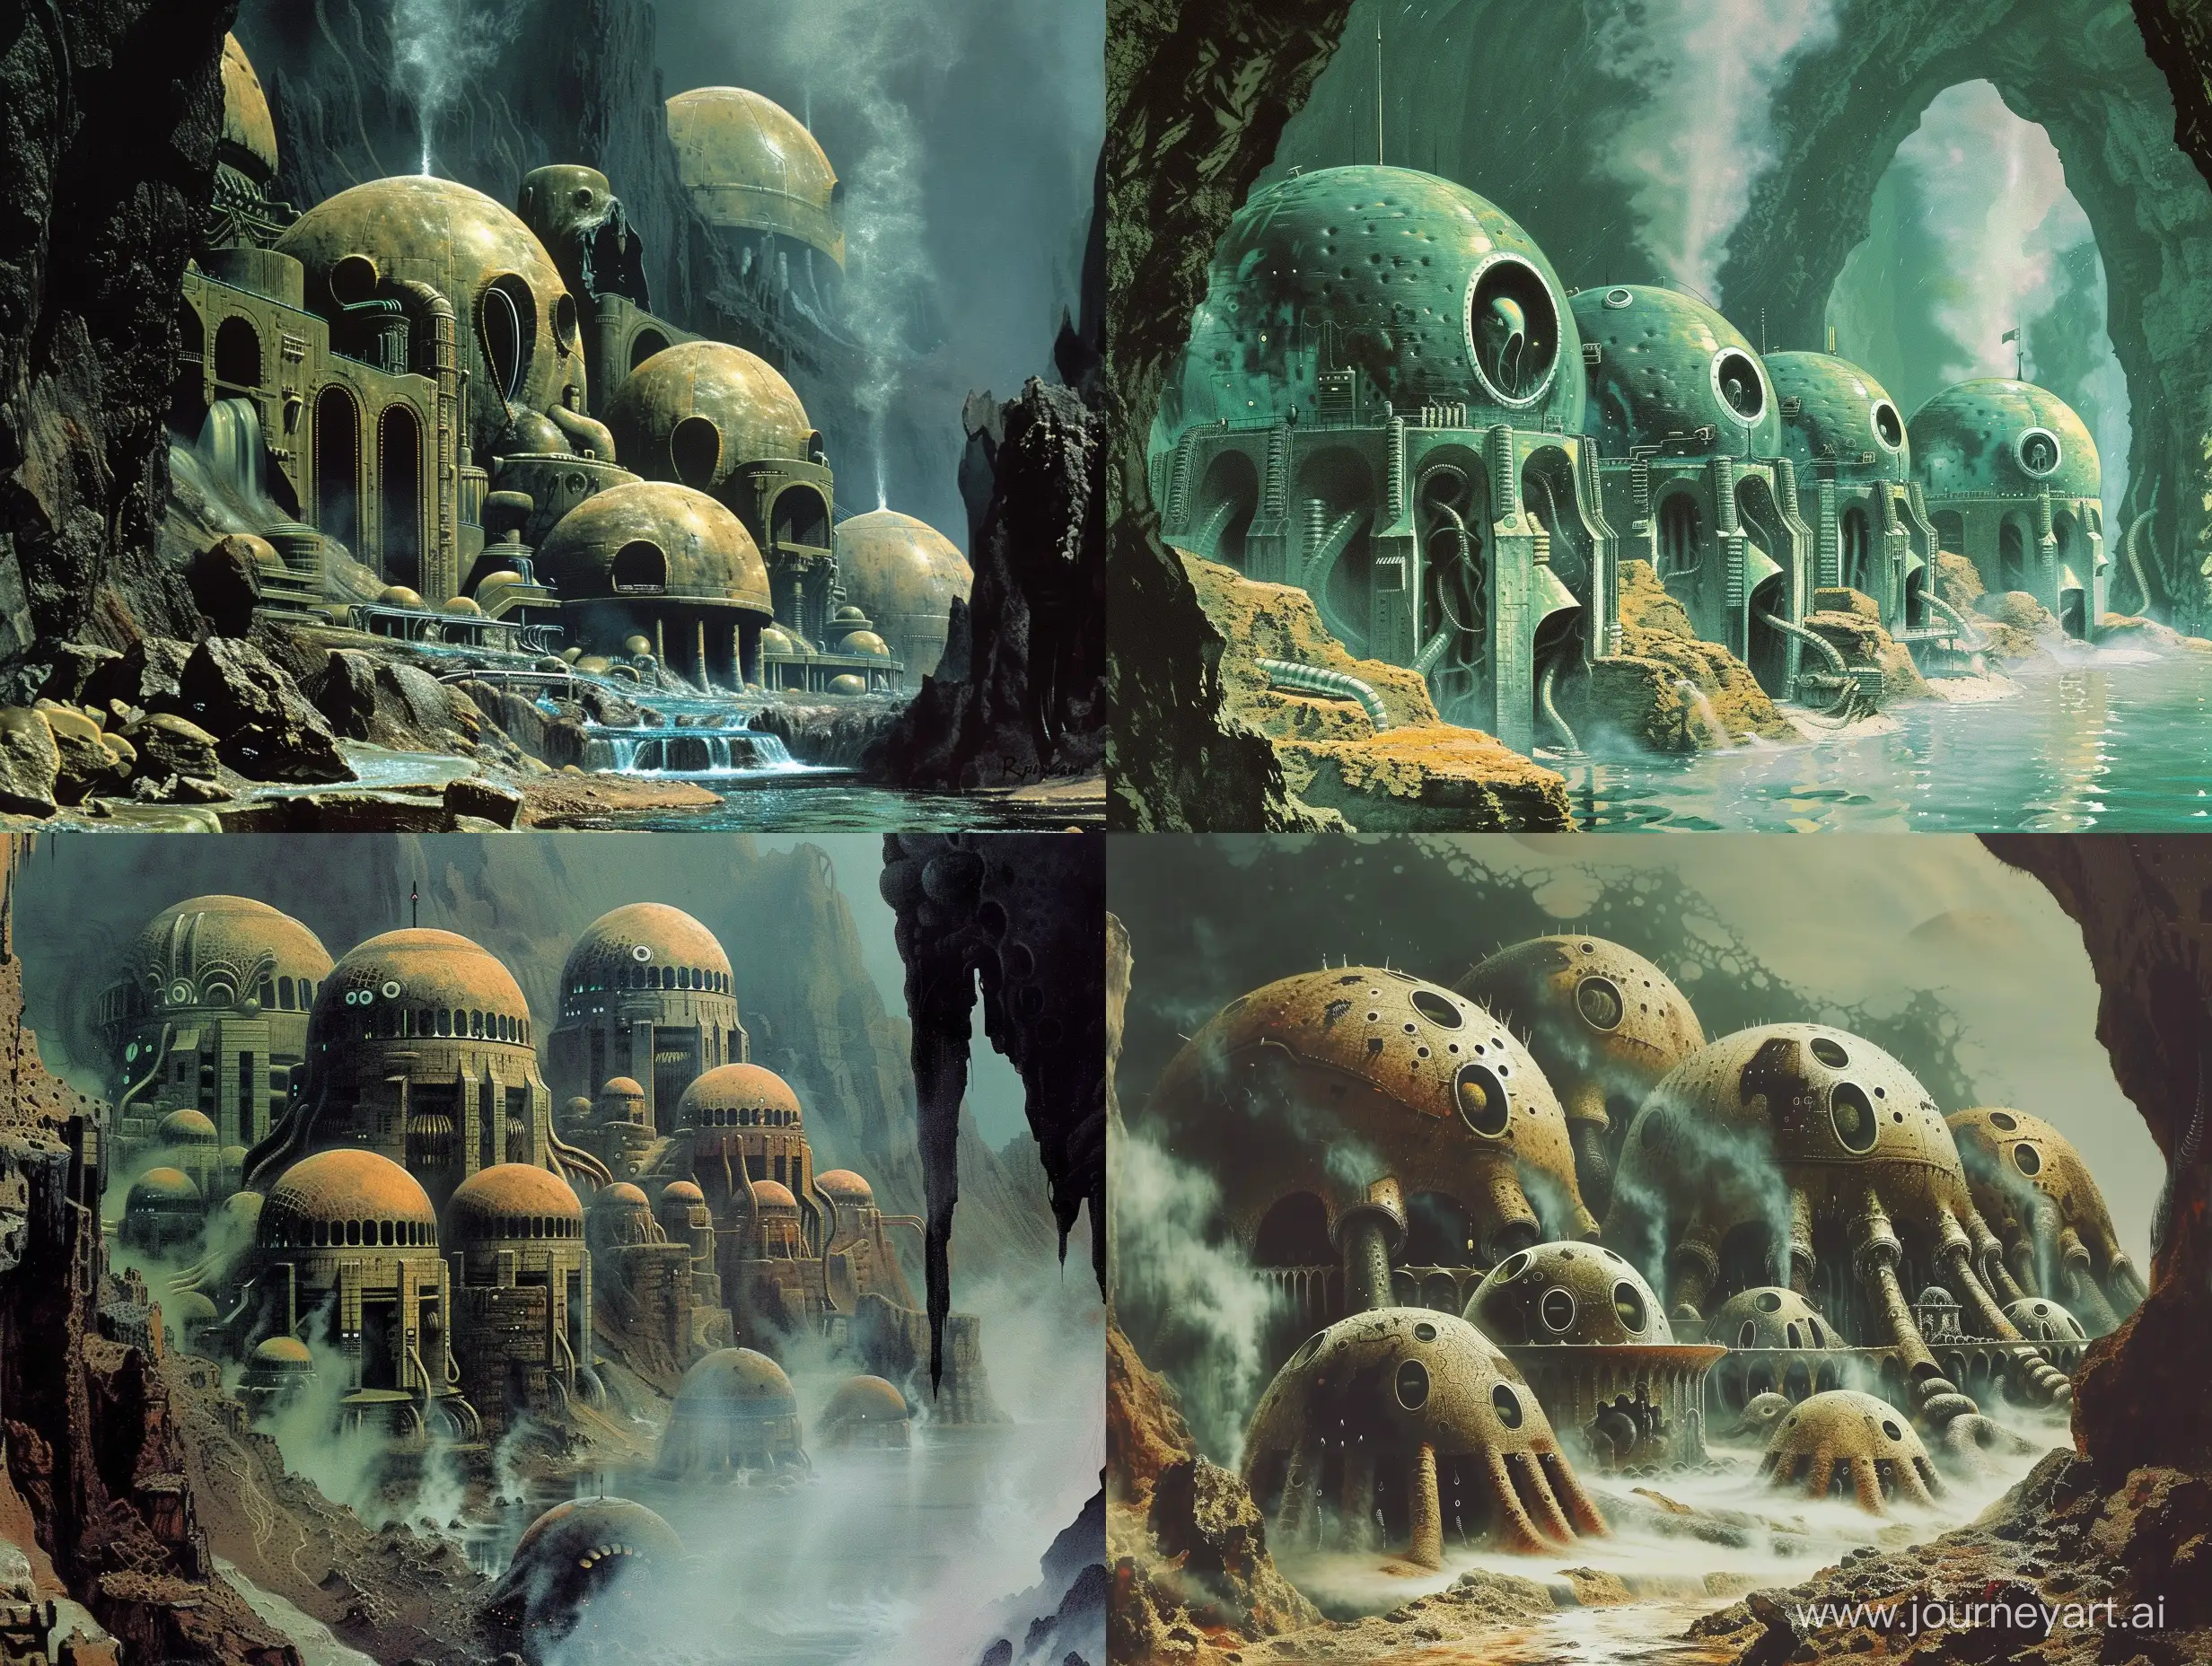 Aquatic-Alien-City-Among-Smoking-Hydrothermal-Vents-in-Retro-Science-Fiction-Style